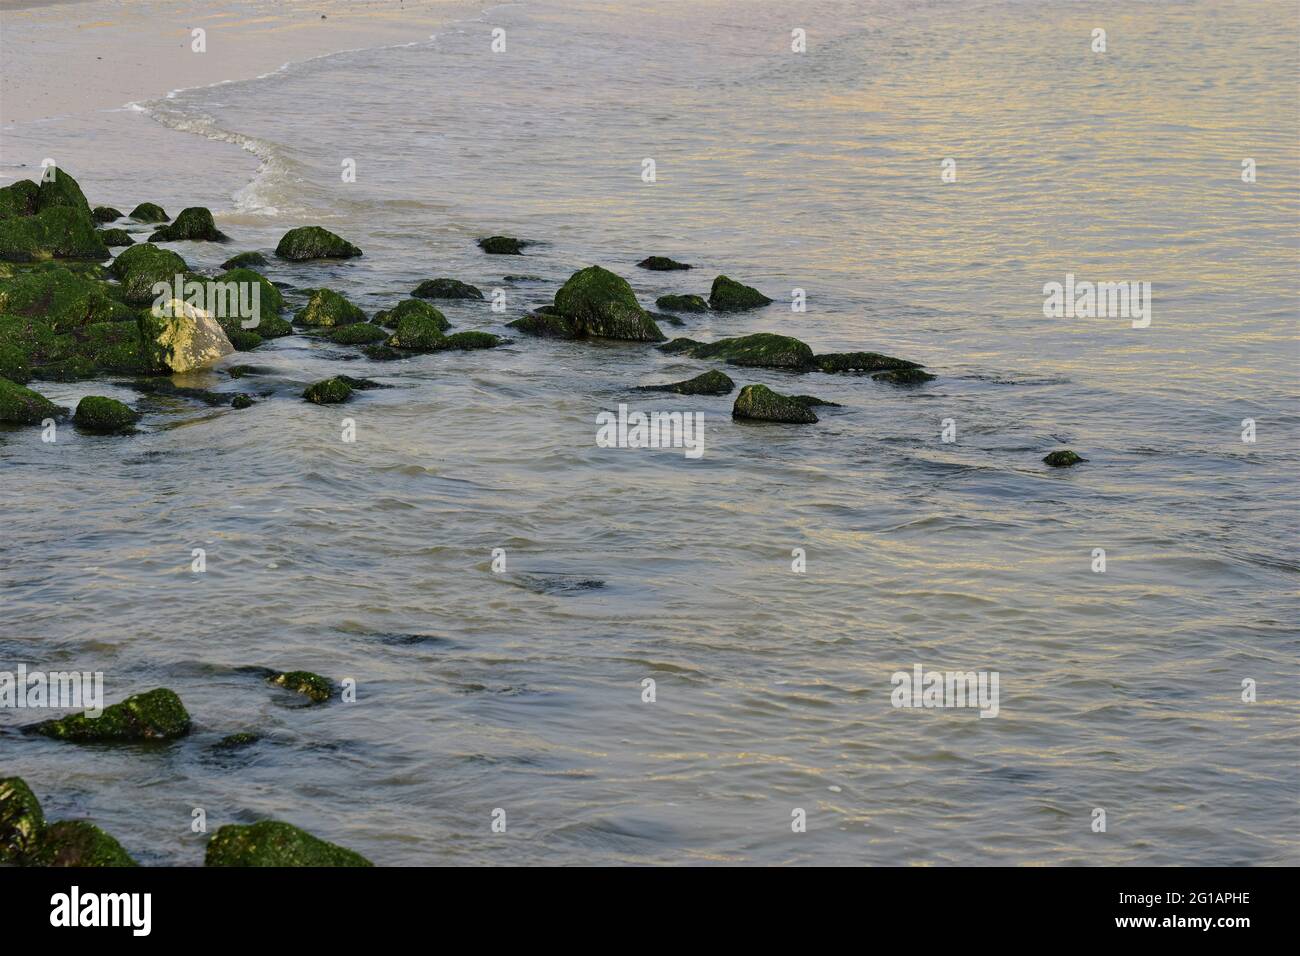 Stones overgrown with algae in the shallow water on the beach Stock Photo